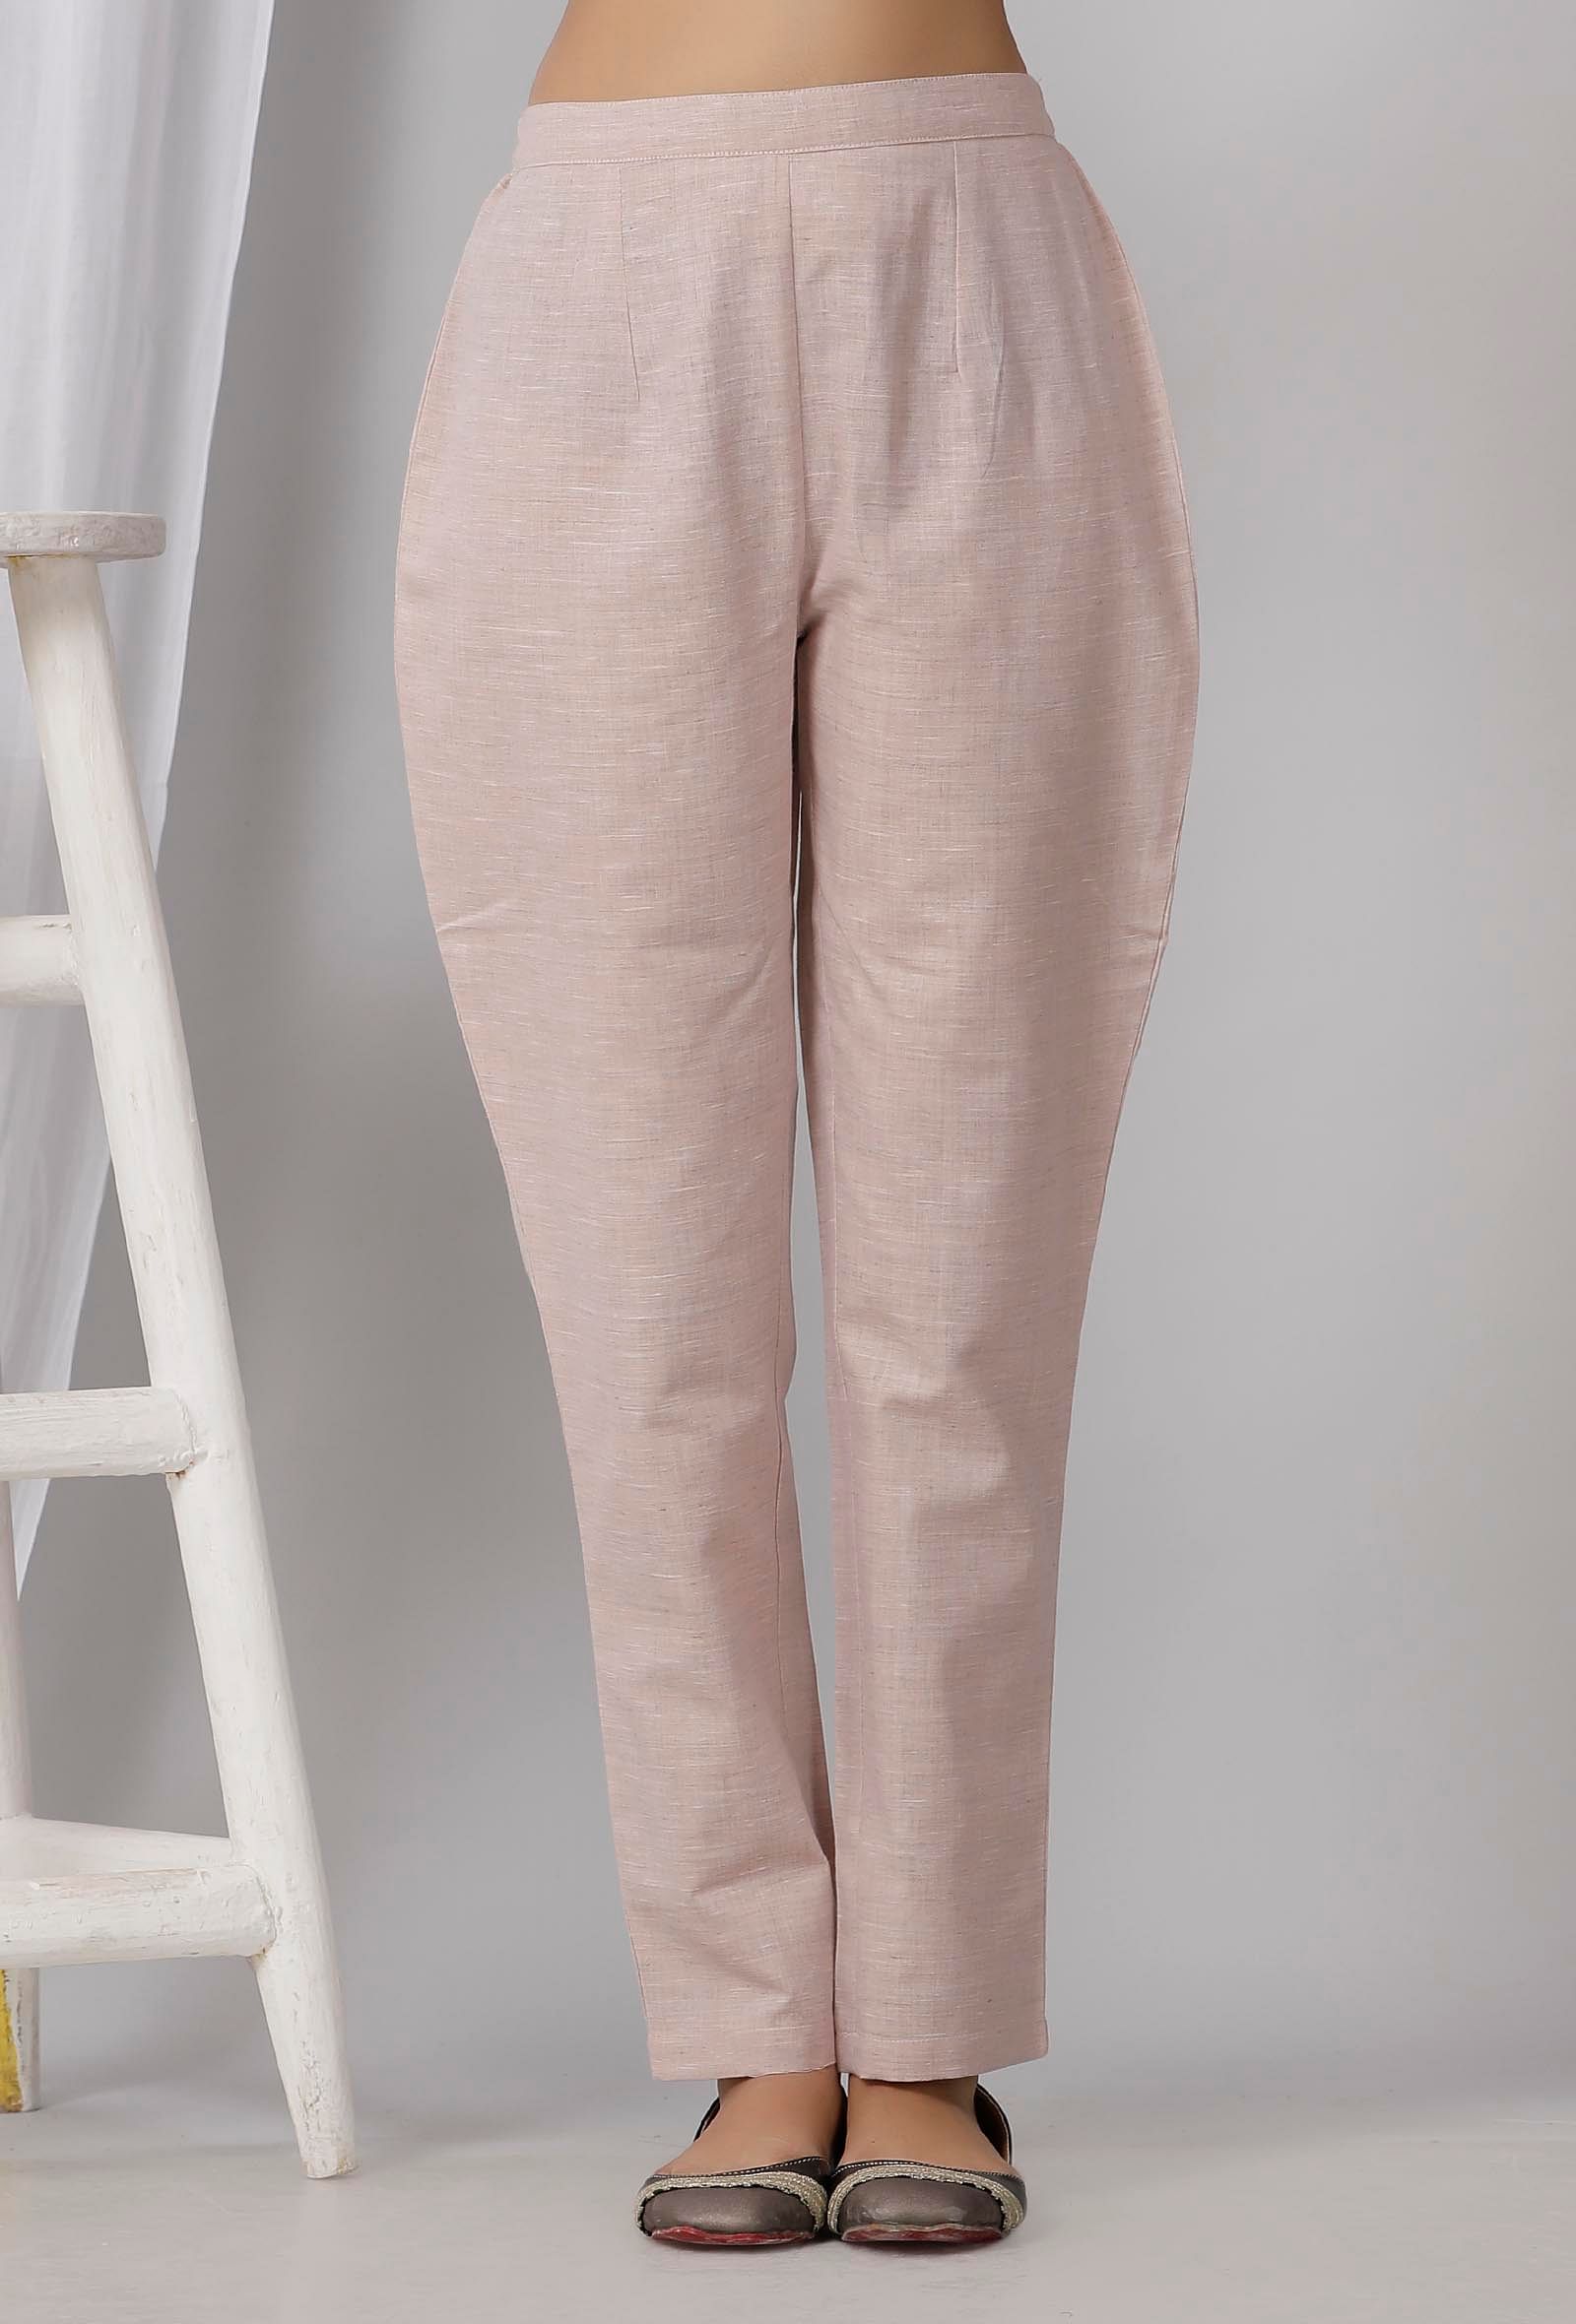 Cream Solid Cotton Trousers